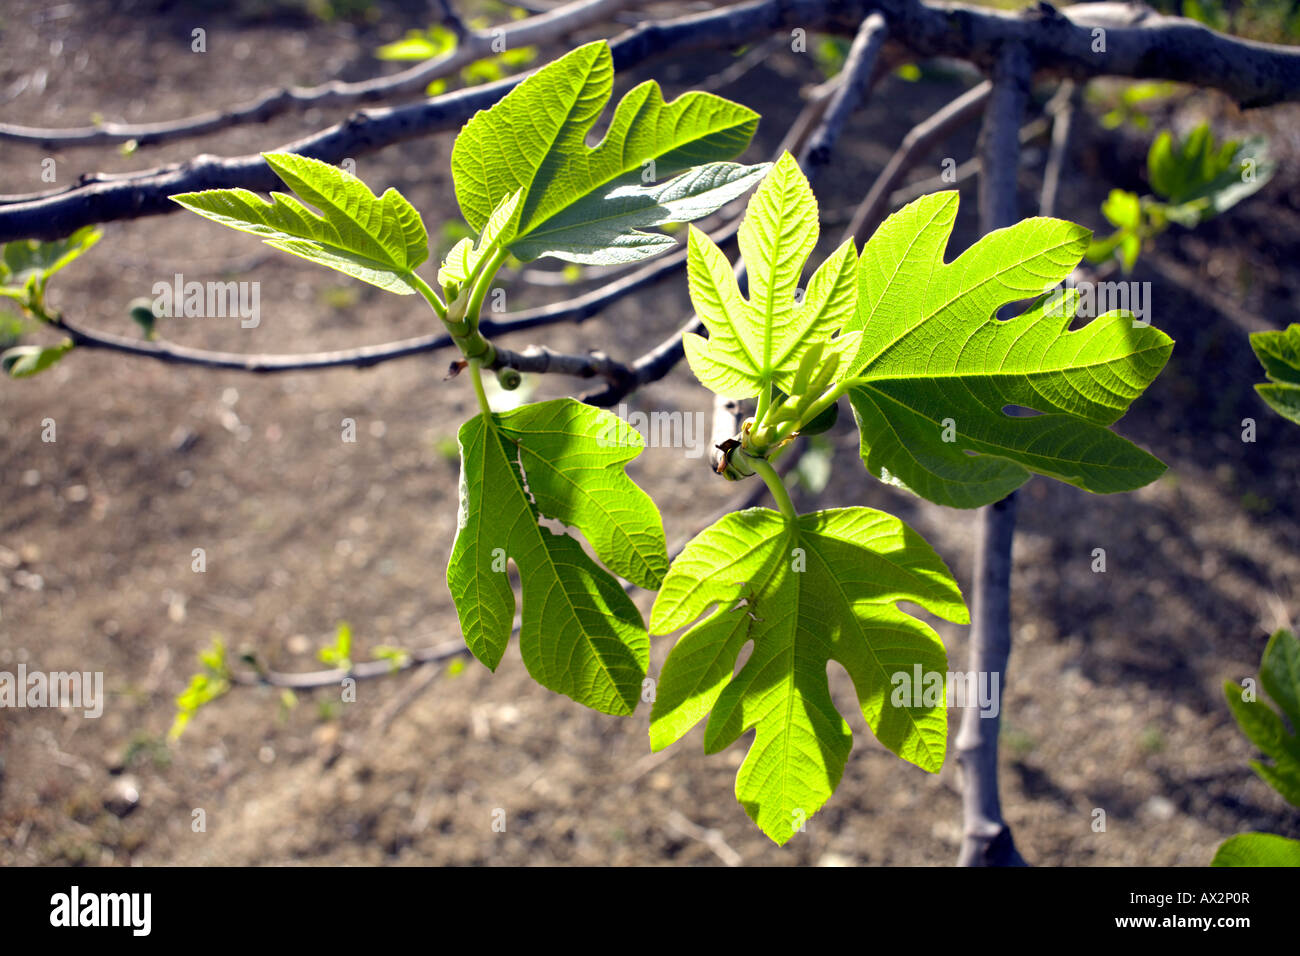 Common fig ( Ficus carica ) young leaves and fruit in springtime,  Alhaurin El Grande, Malaga Province, Andalucia,  Spain Stock Photo